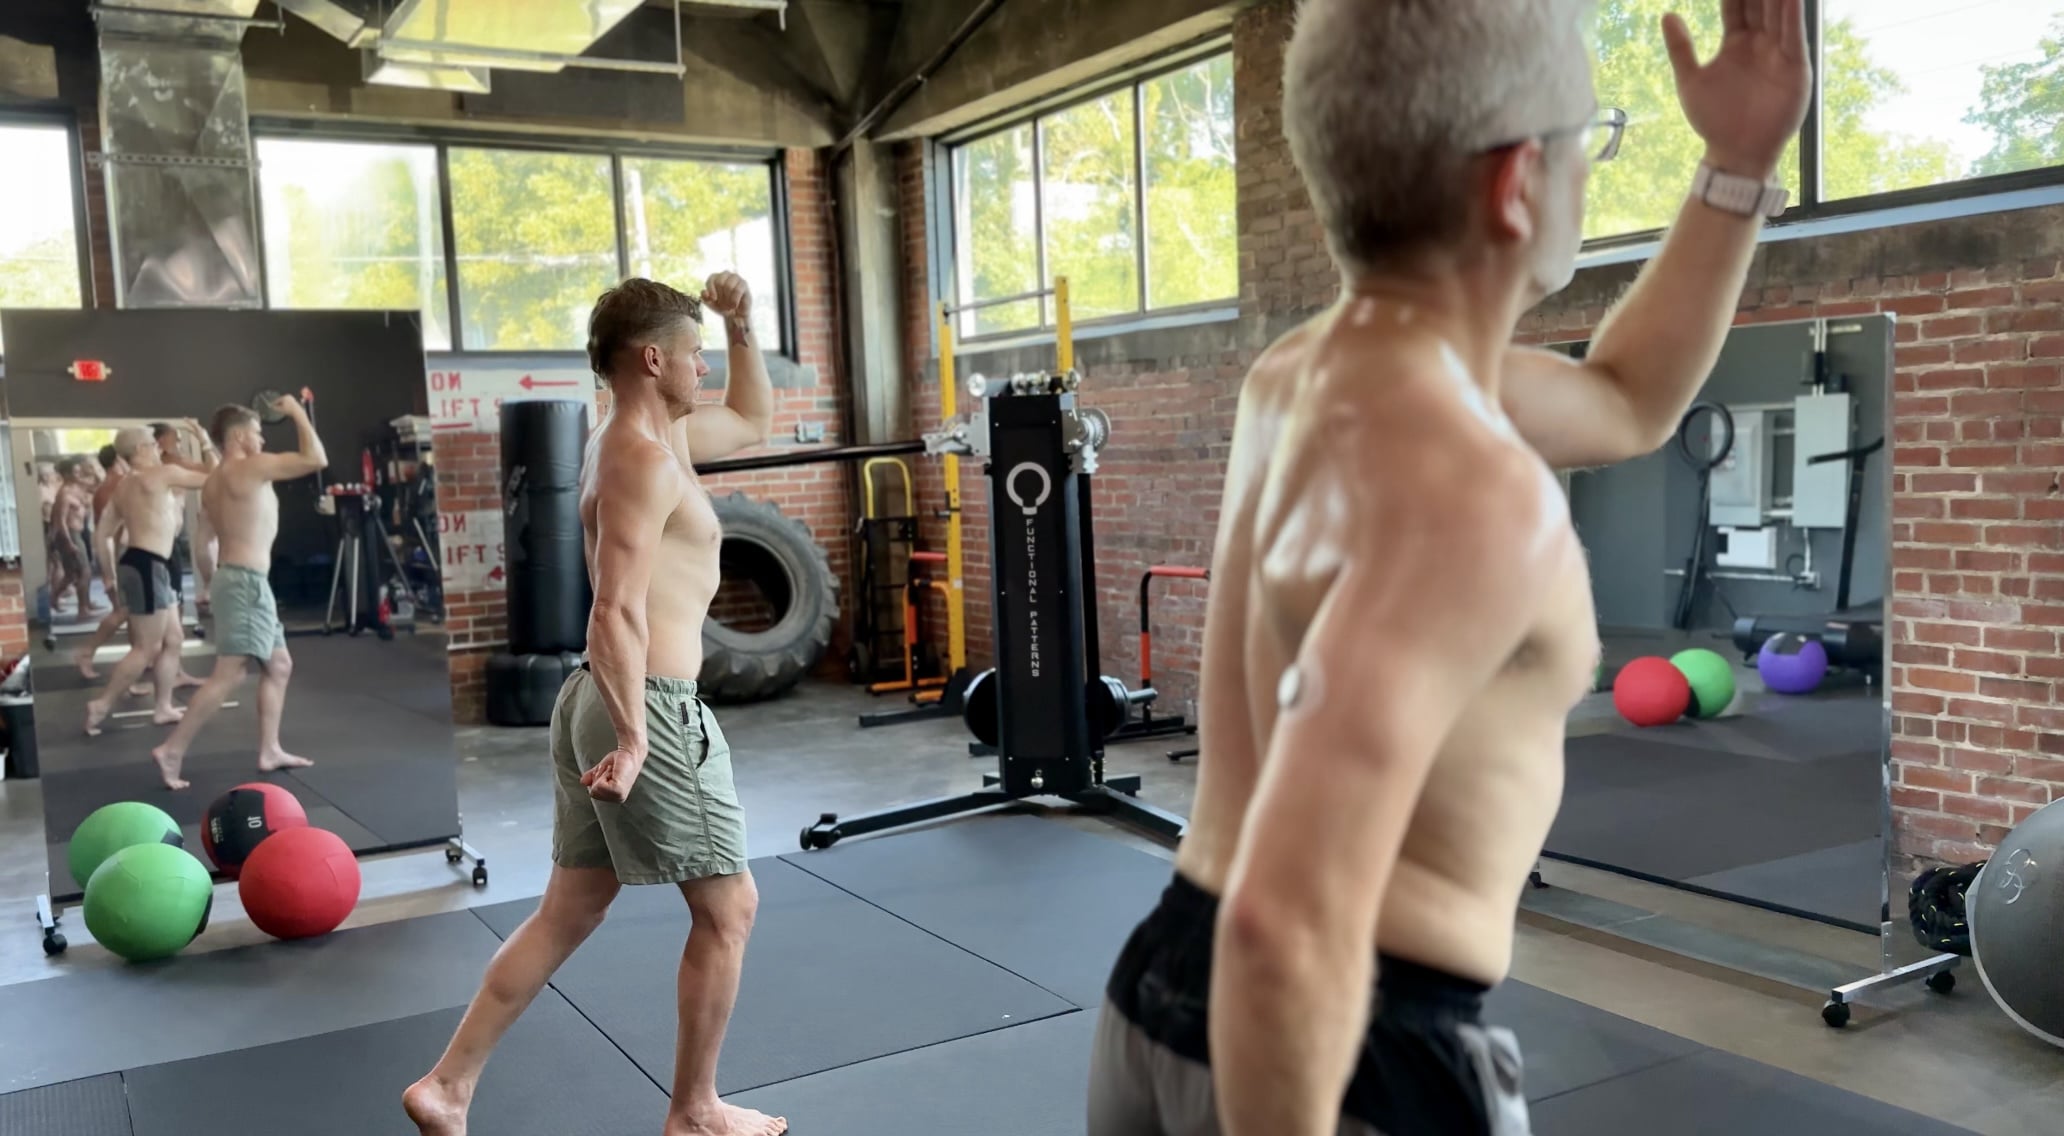 Chronic pain relief, biomechanics training, strength and conditioning | Chattanooga, Huntsville, Knoxville, Ooltewah, Cleveland, Nashville, Memphis